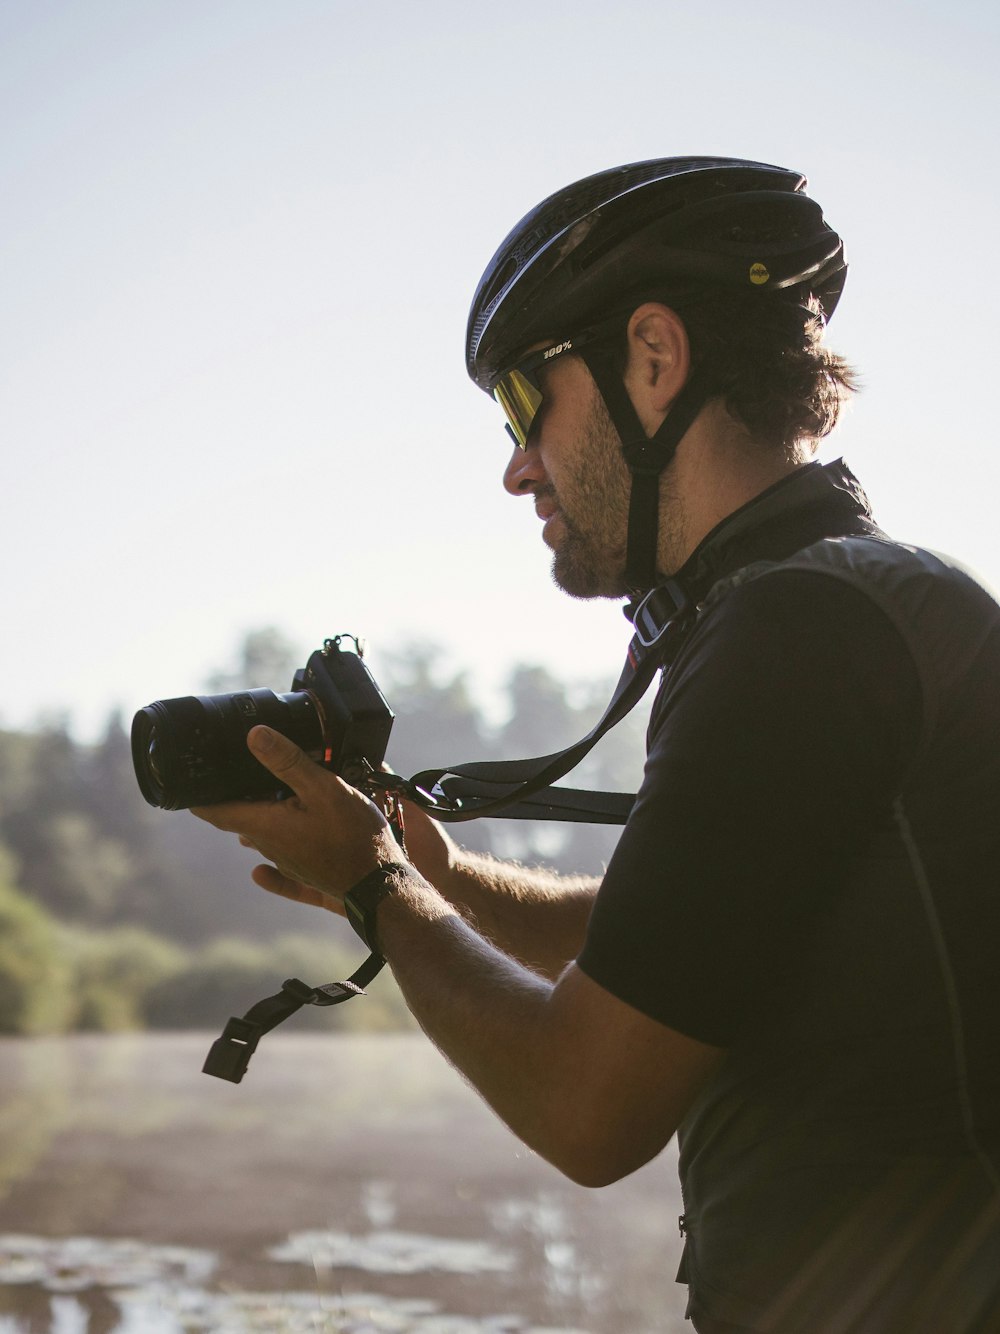 a man wearing a helmet and holding a camera